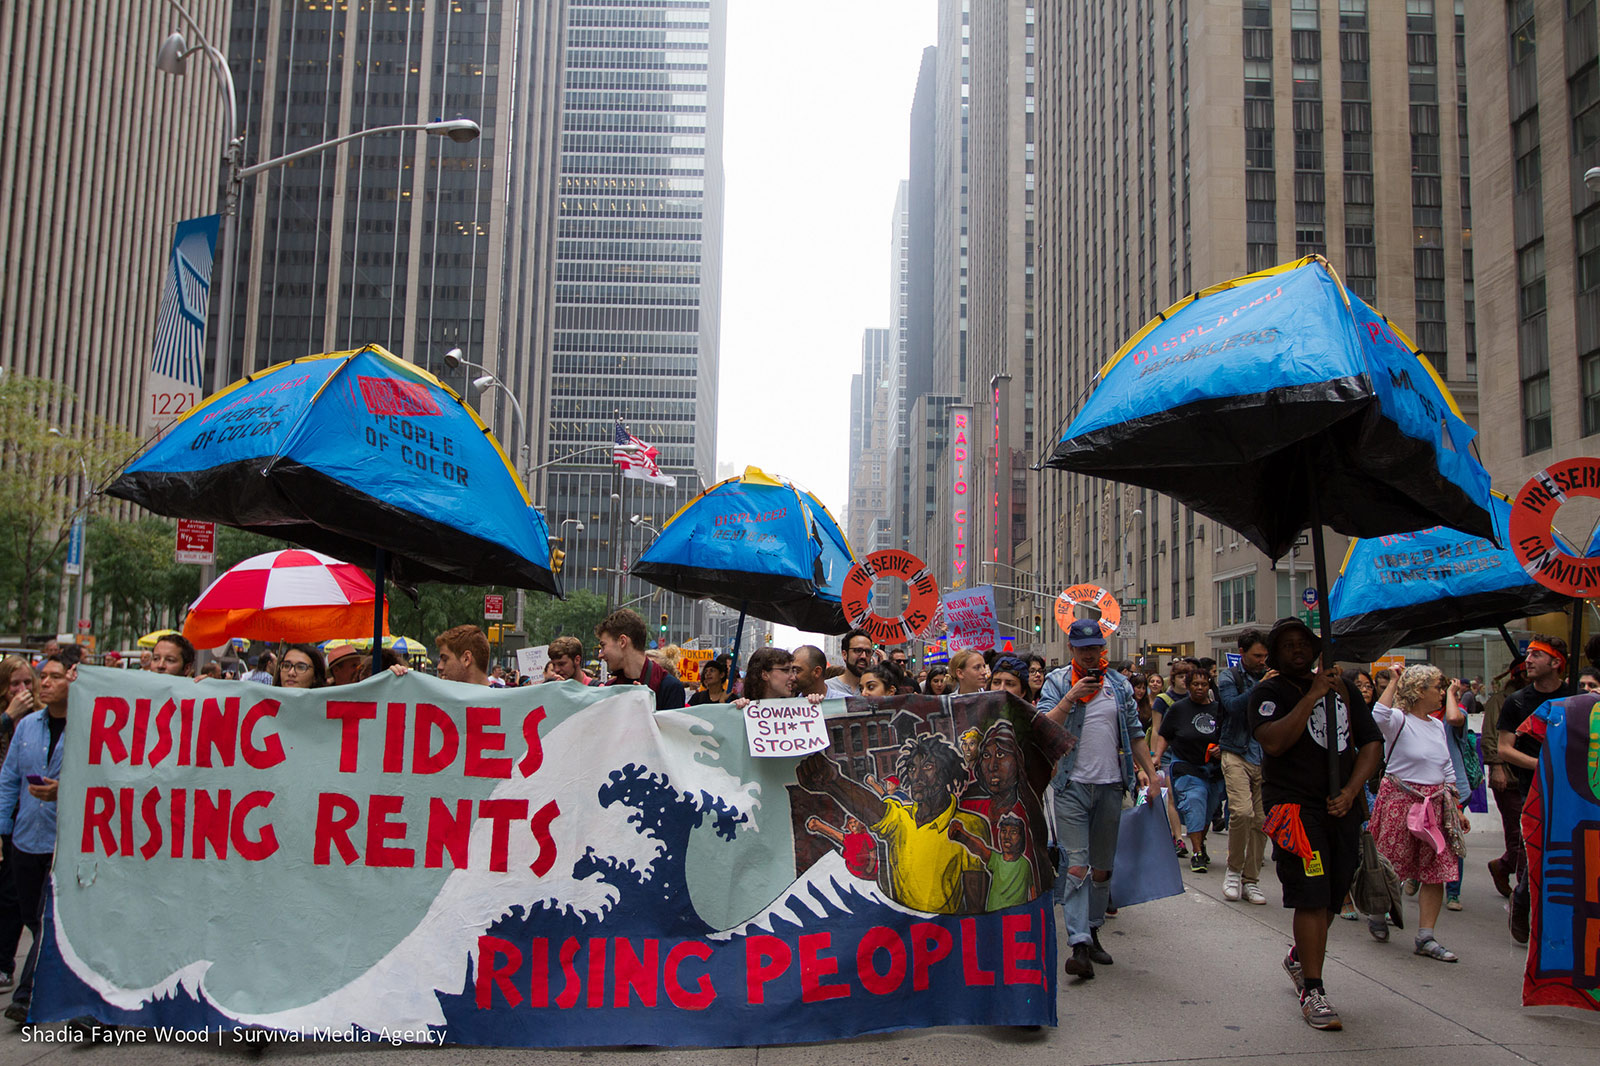 Check out these great photos of the NYC climate march Grist